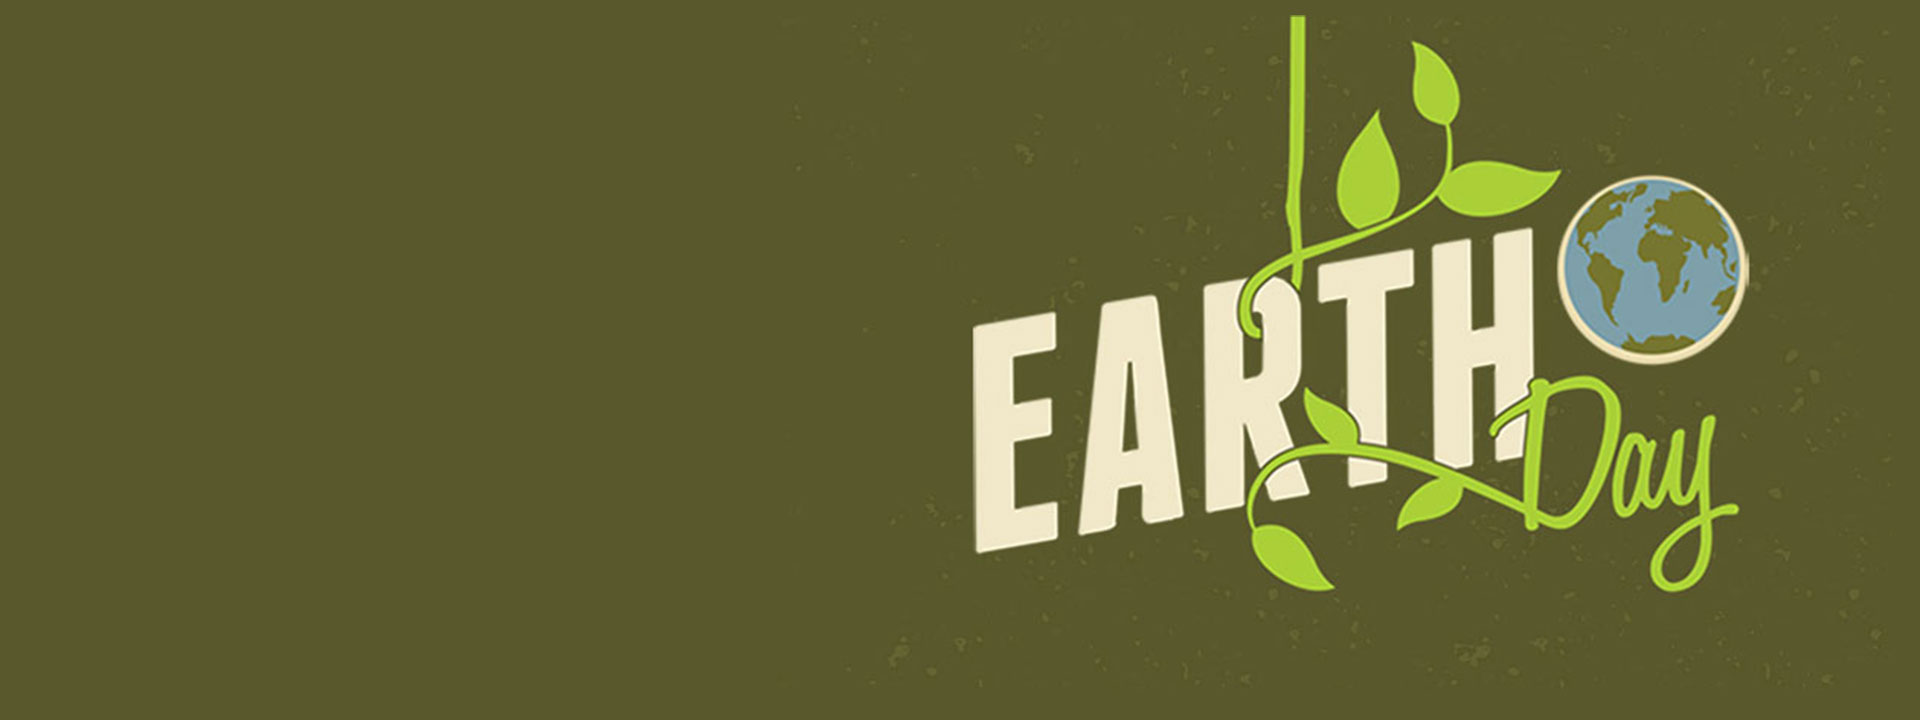 Stylized Earth Day logo with a drawing of the earth and some vines against an olive green background.